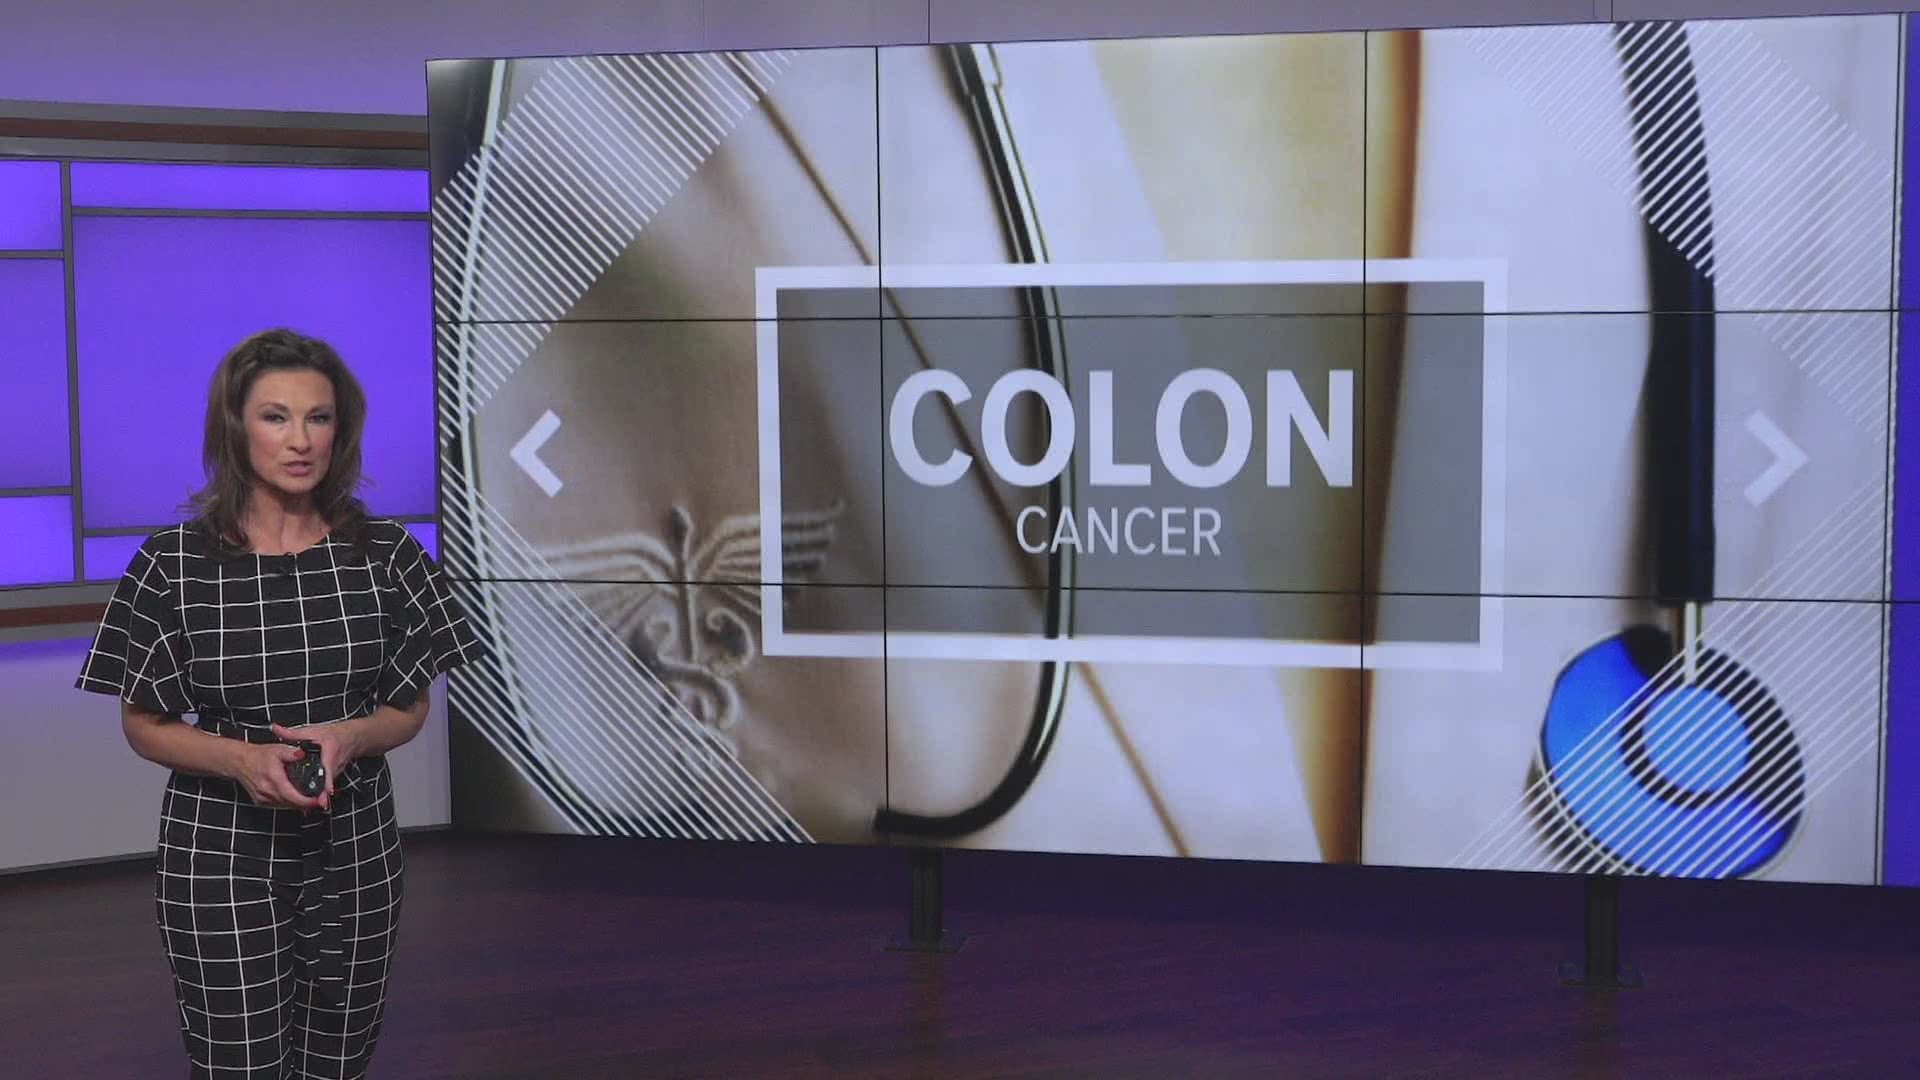 Antibiotic use may be to blame for increase in younger colon cancer patients.